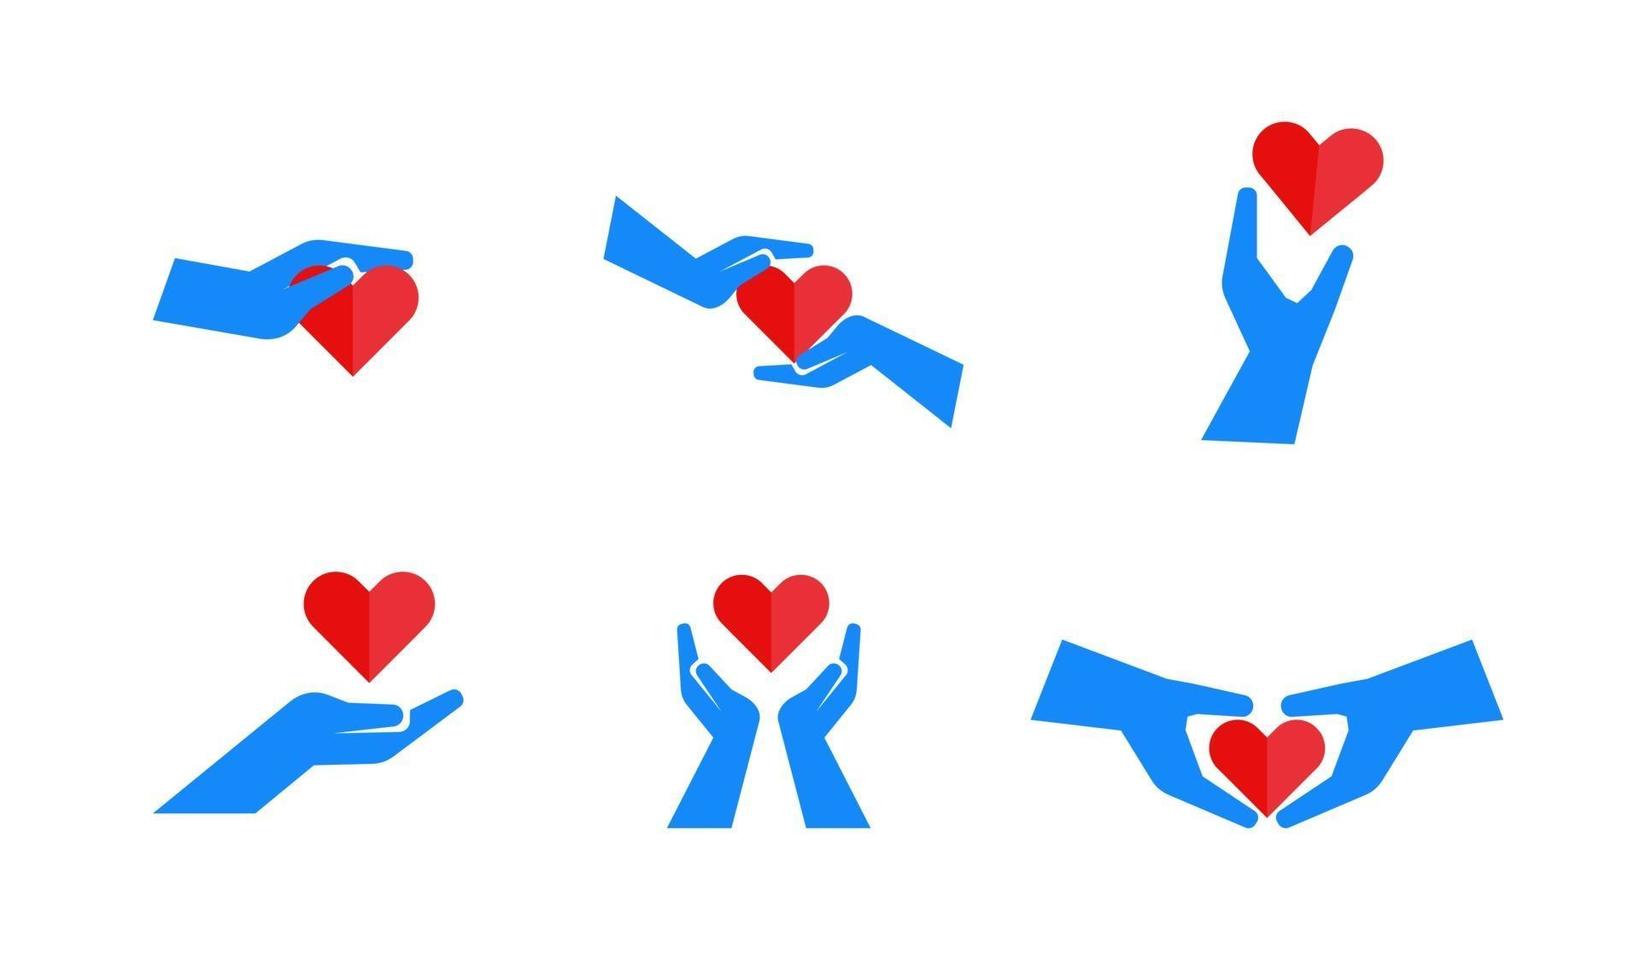 set collection icon blood donation save heart love hand illustration design vector